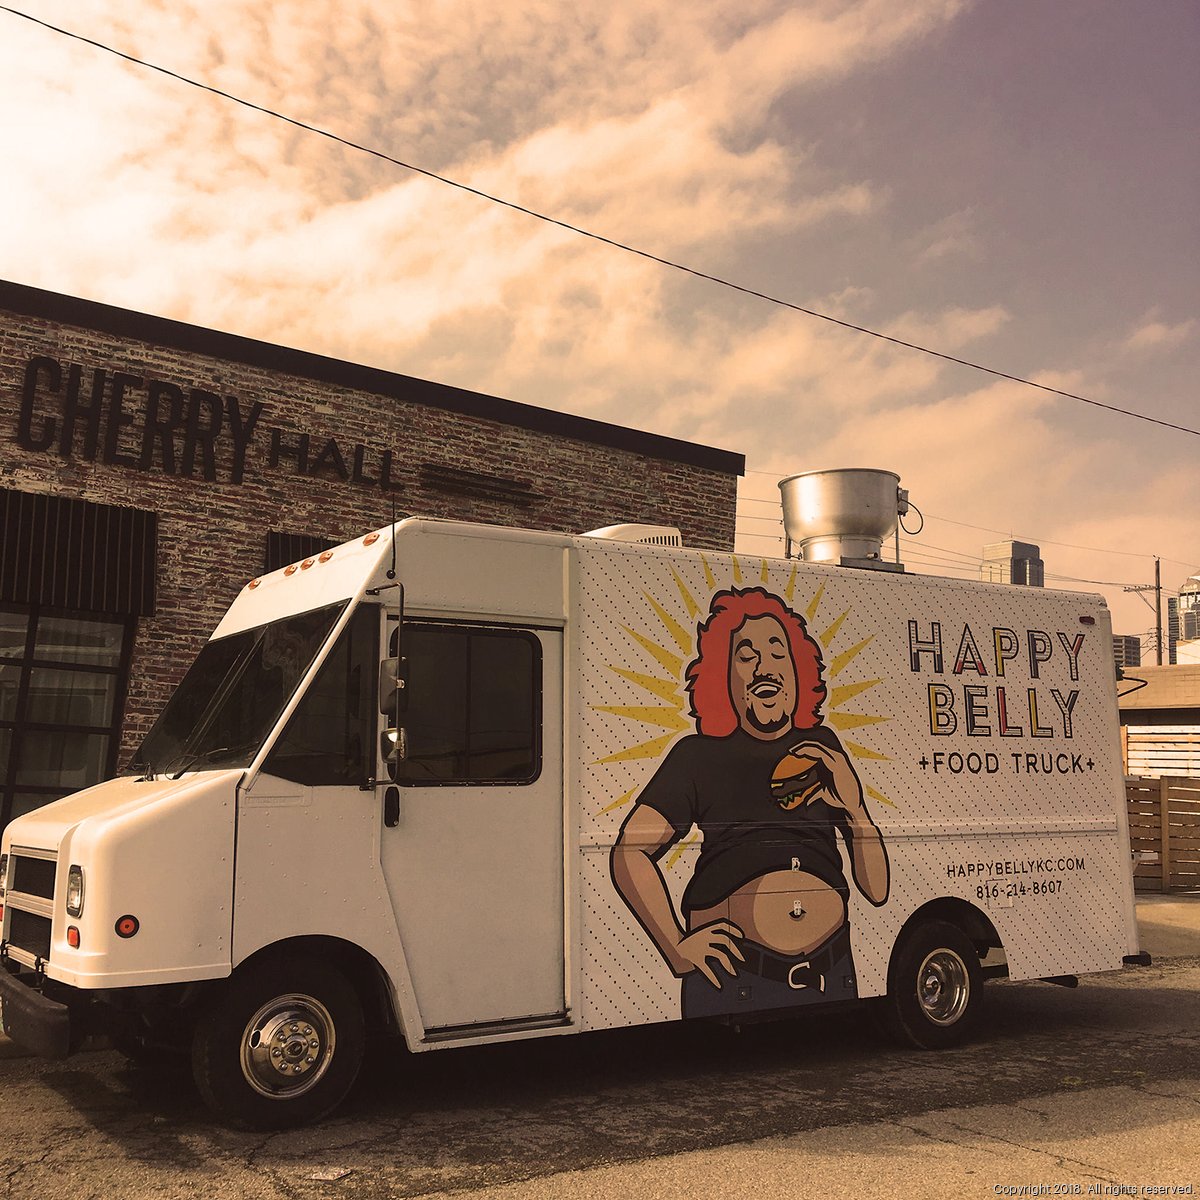 Happy belly eatery